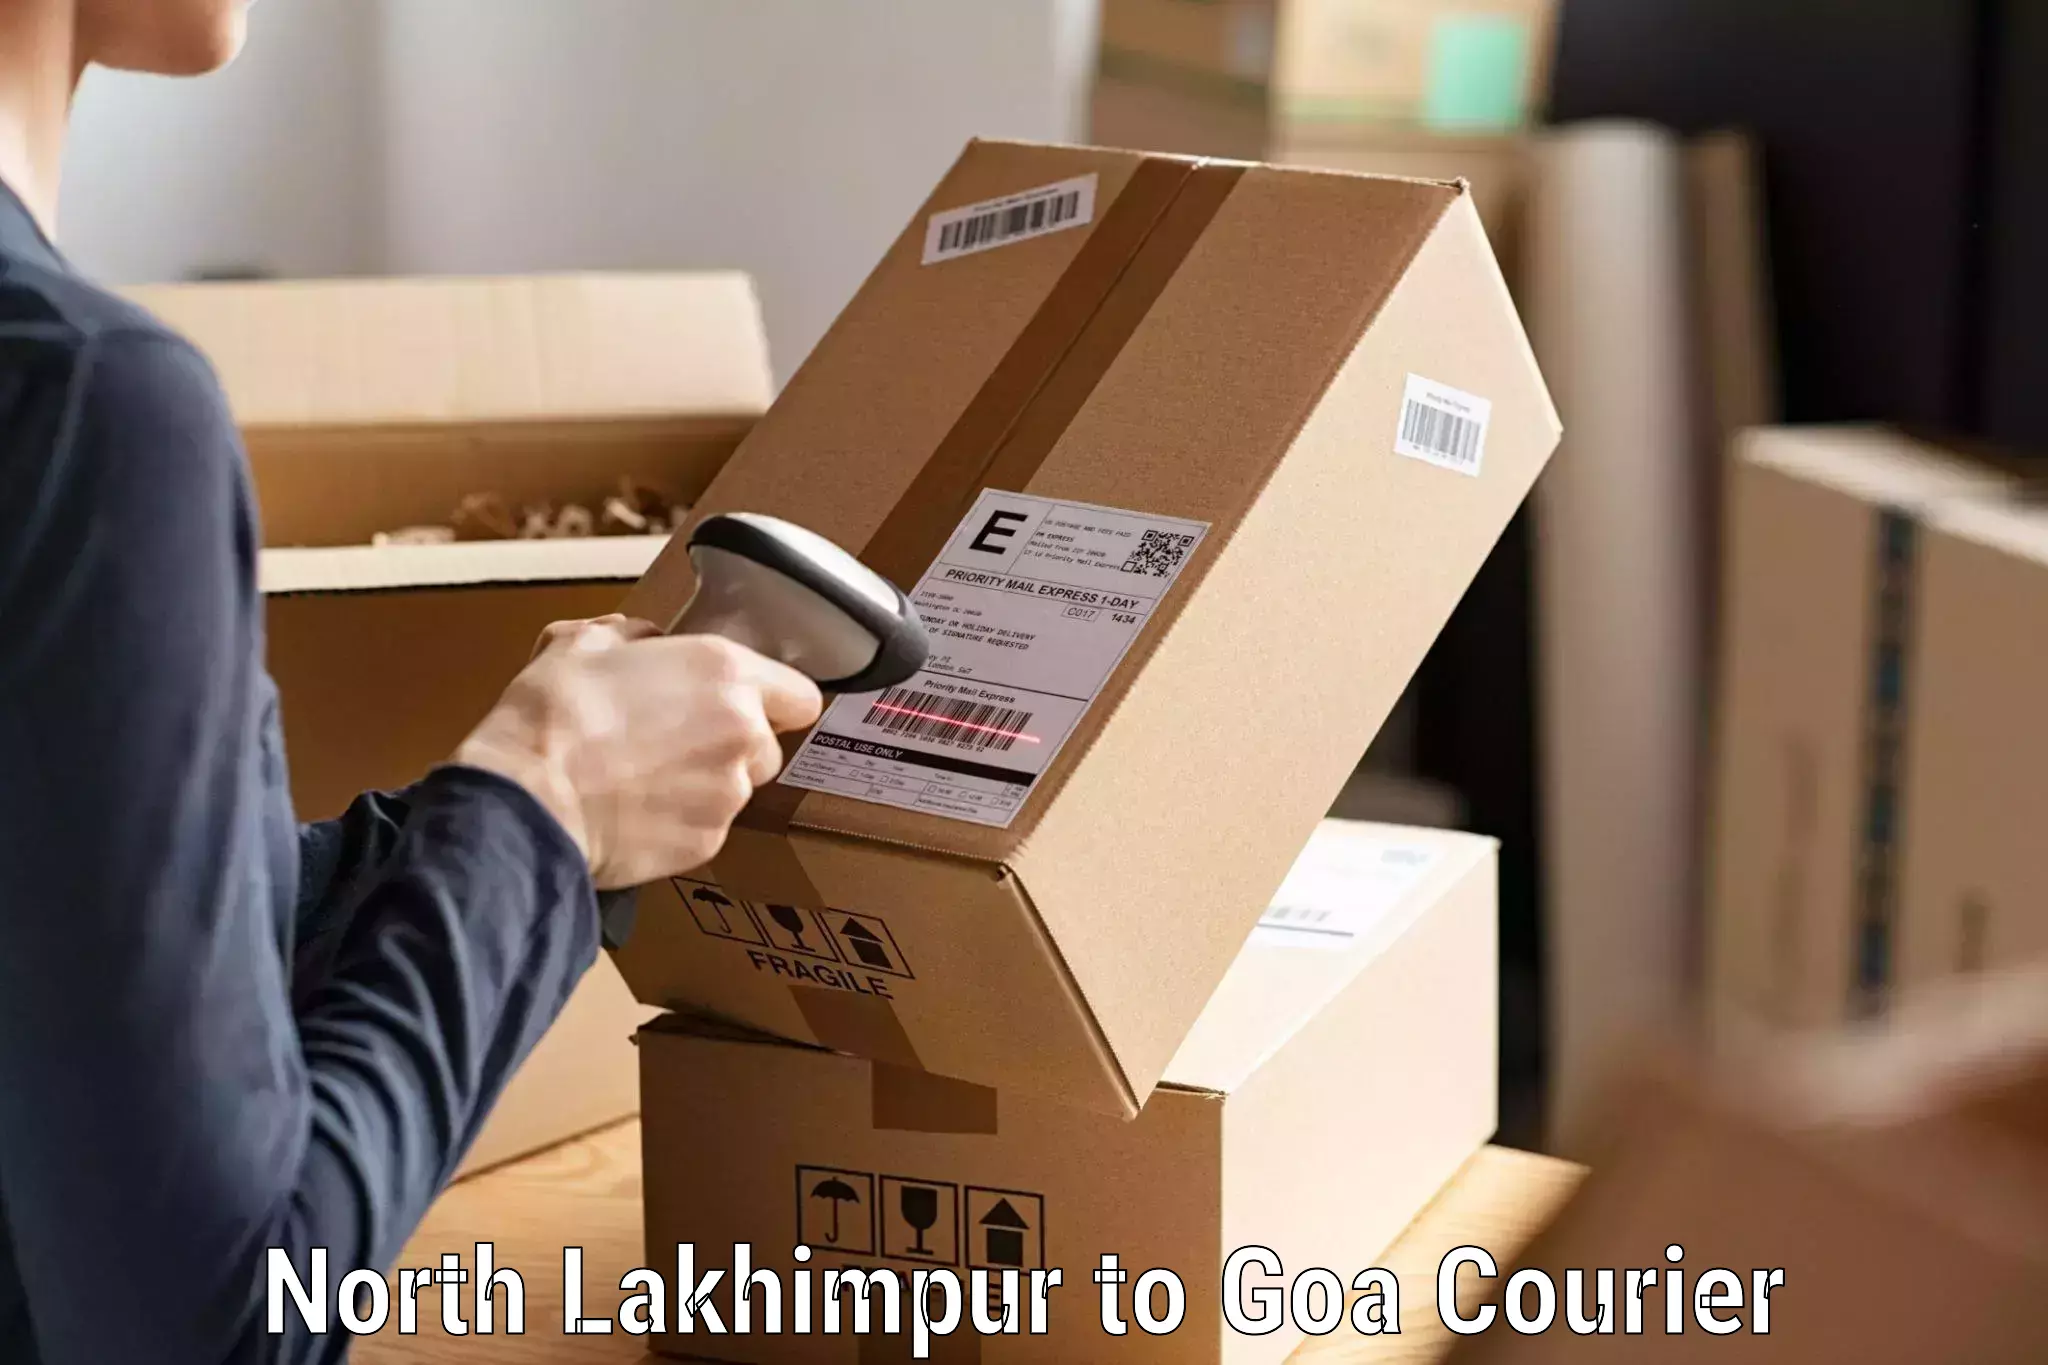 Courier services in North Lakhimpur to Vasco da Gama